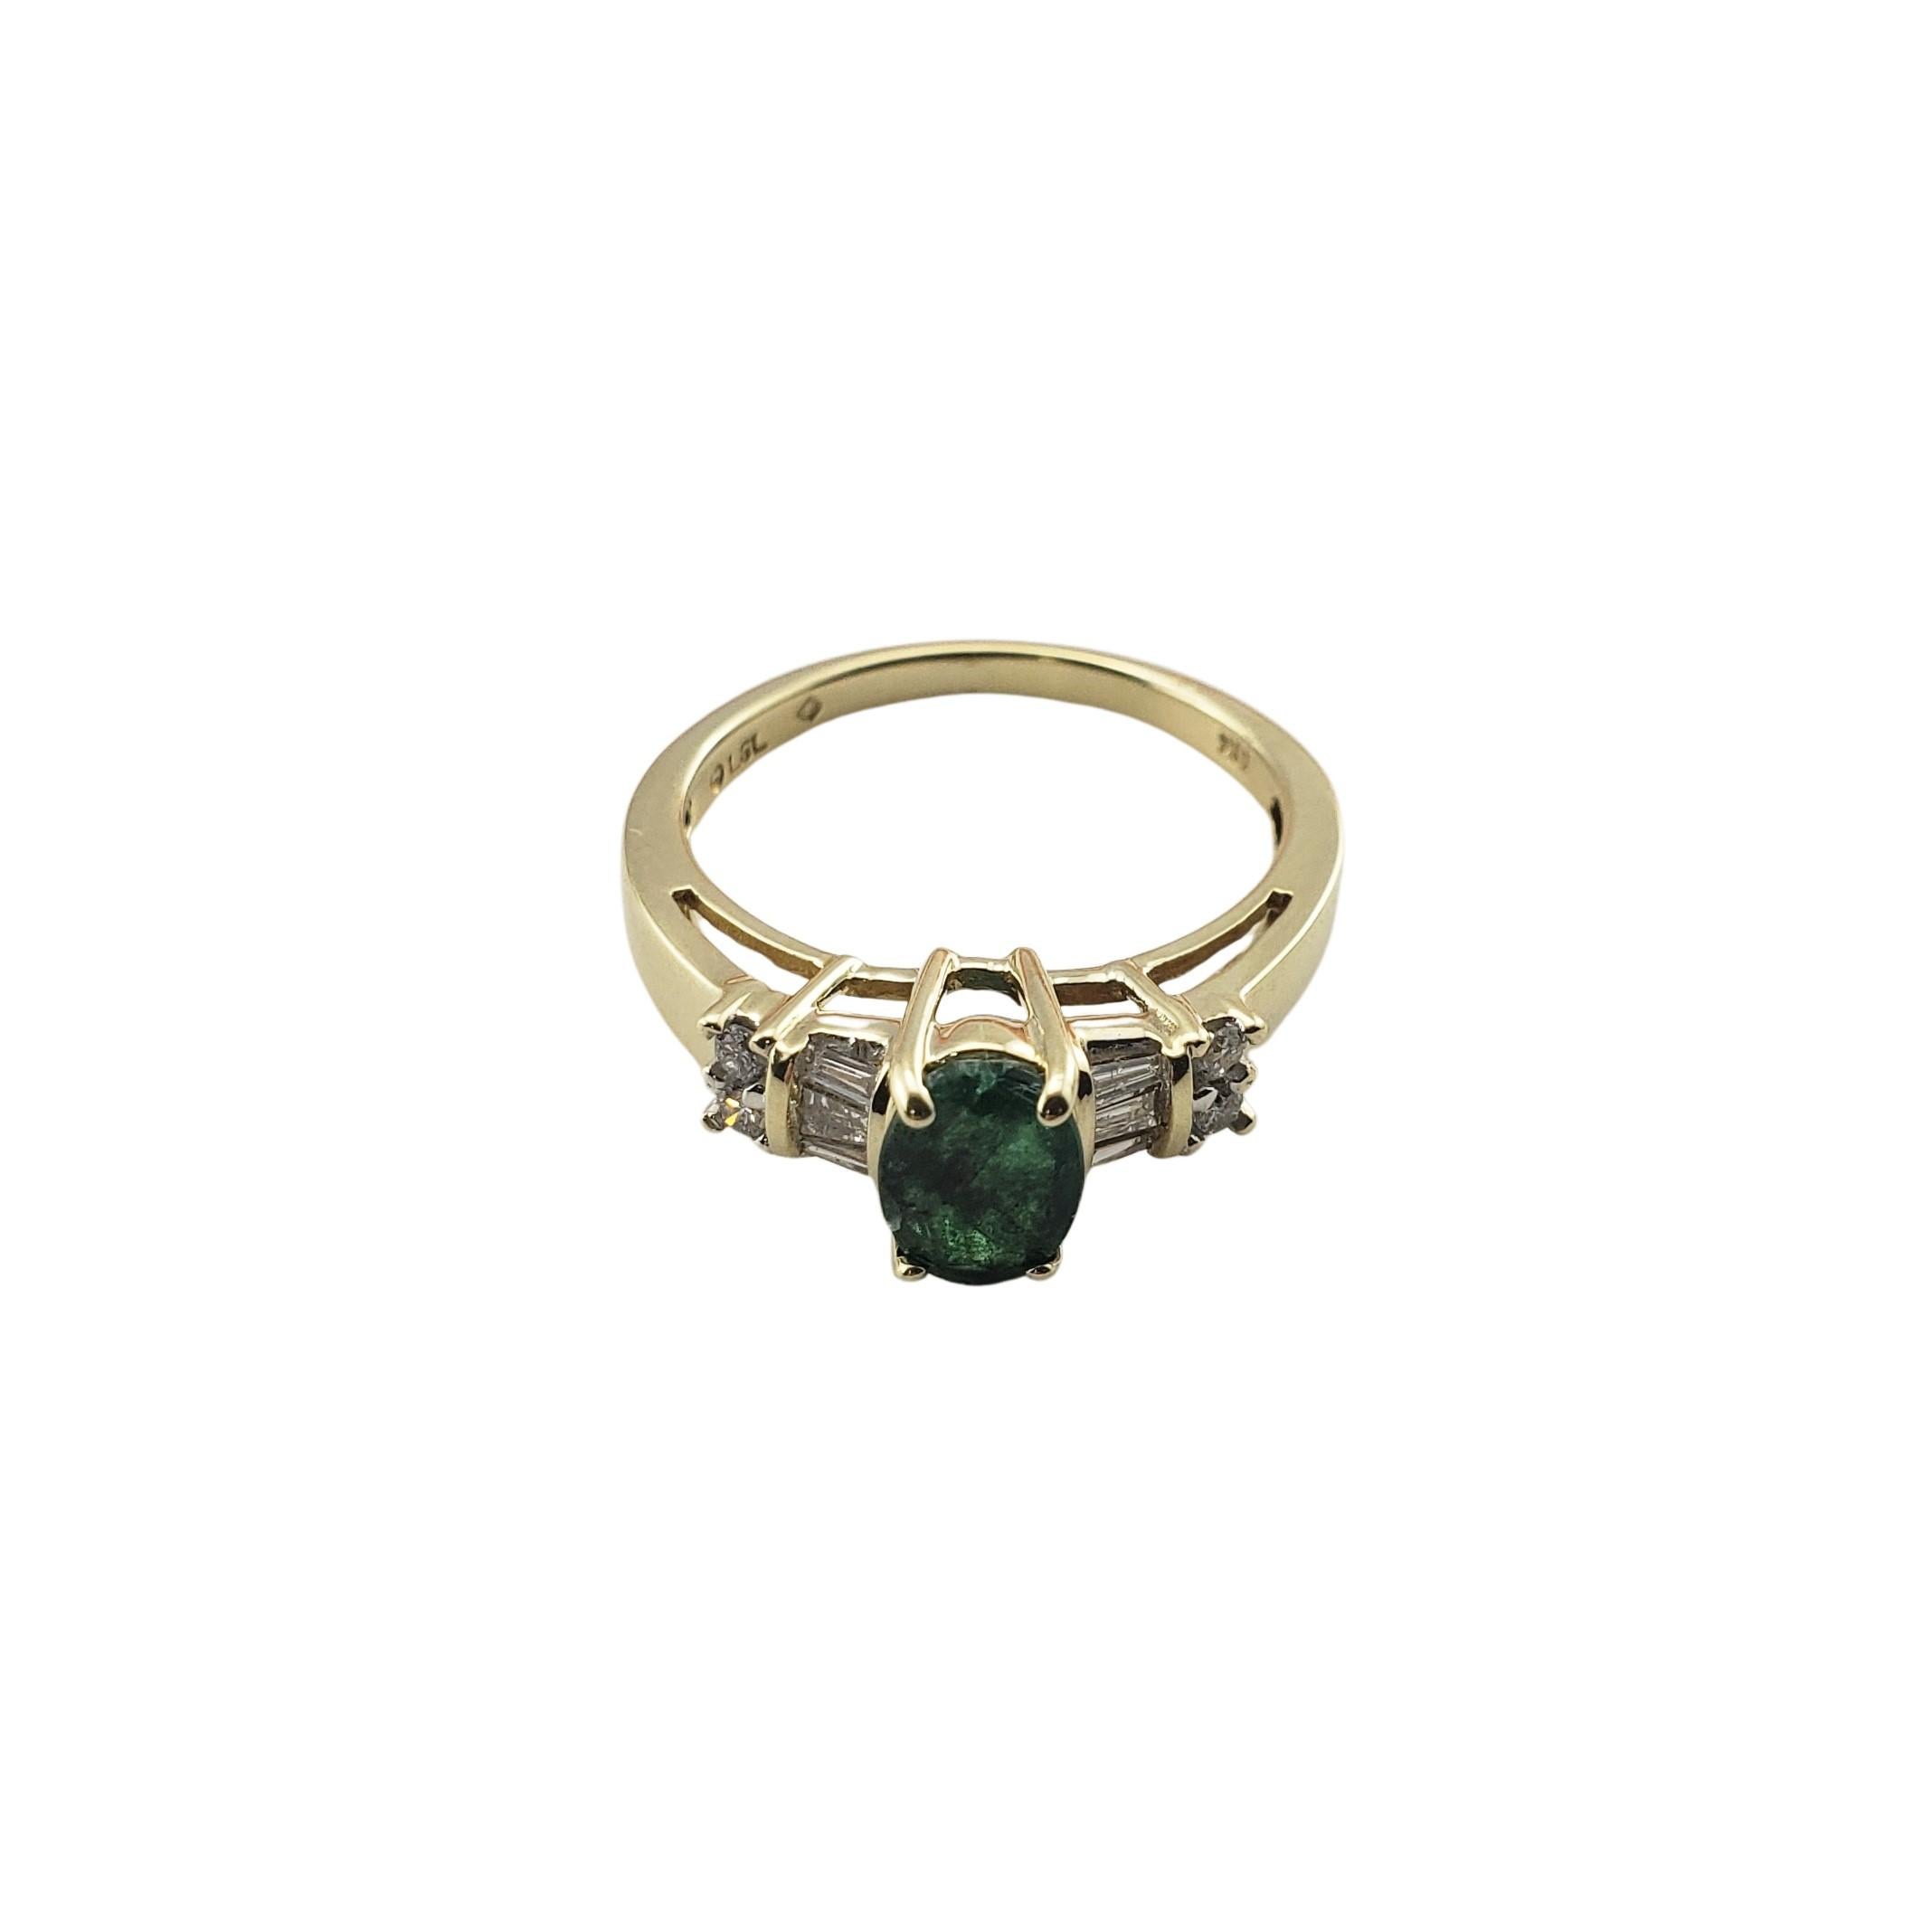 10 Karat Yellow Gold Emerald and Diamond Ring Size 7-

This lovely ring features one oval emerald (7 mm x 6 mm), six baguette diamonds and four round brilliant cut diamonds set in 10K yellow gold.  Shank:  2 mm.

Approximate total diamond weight: 